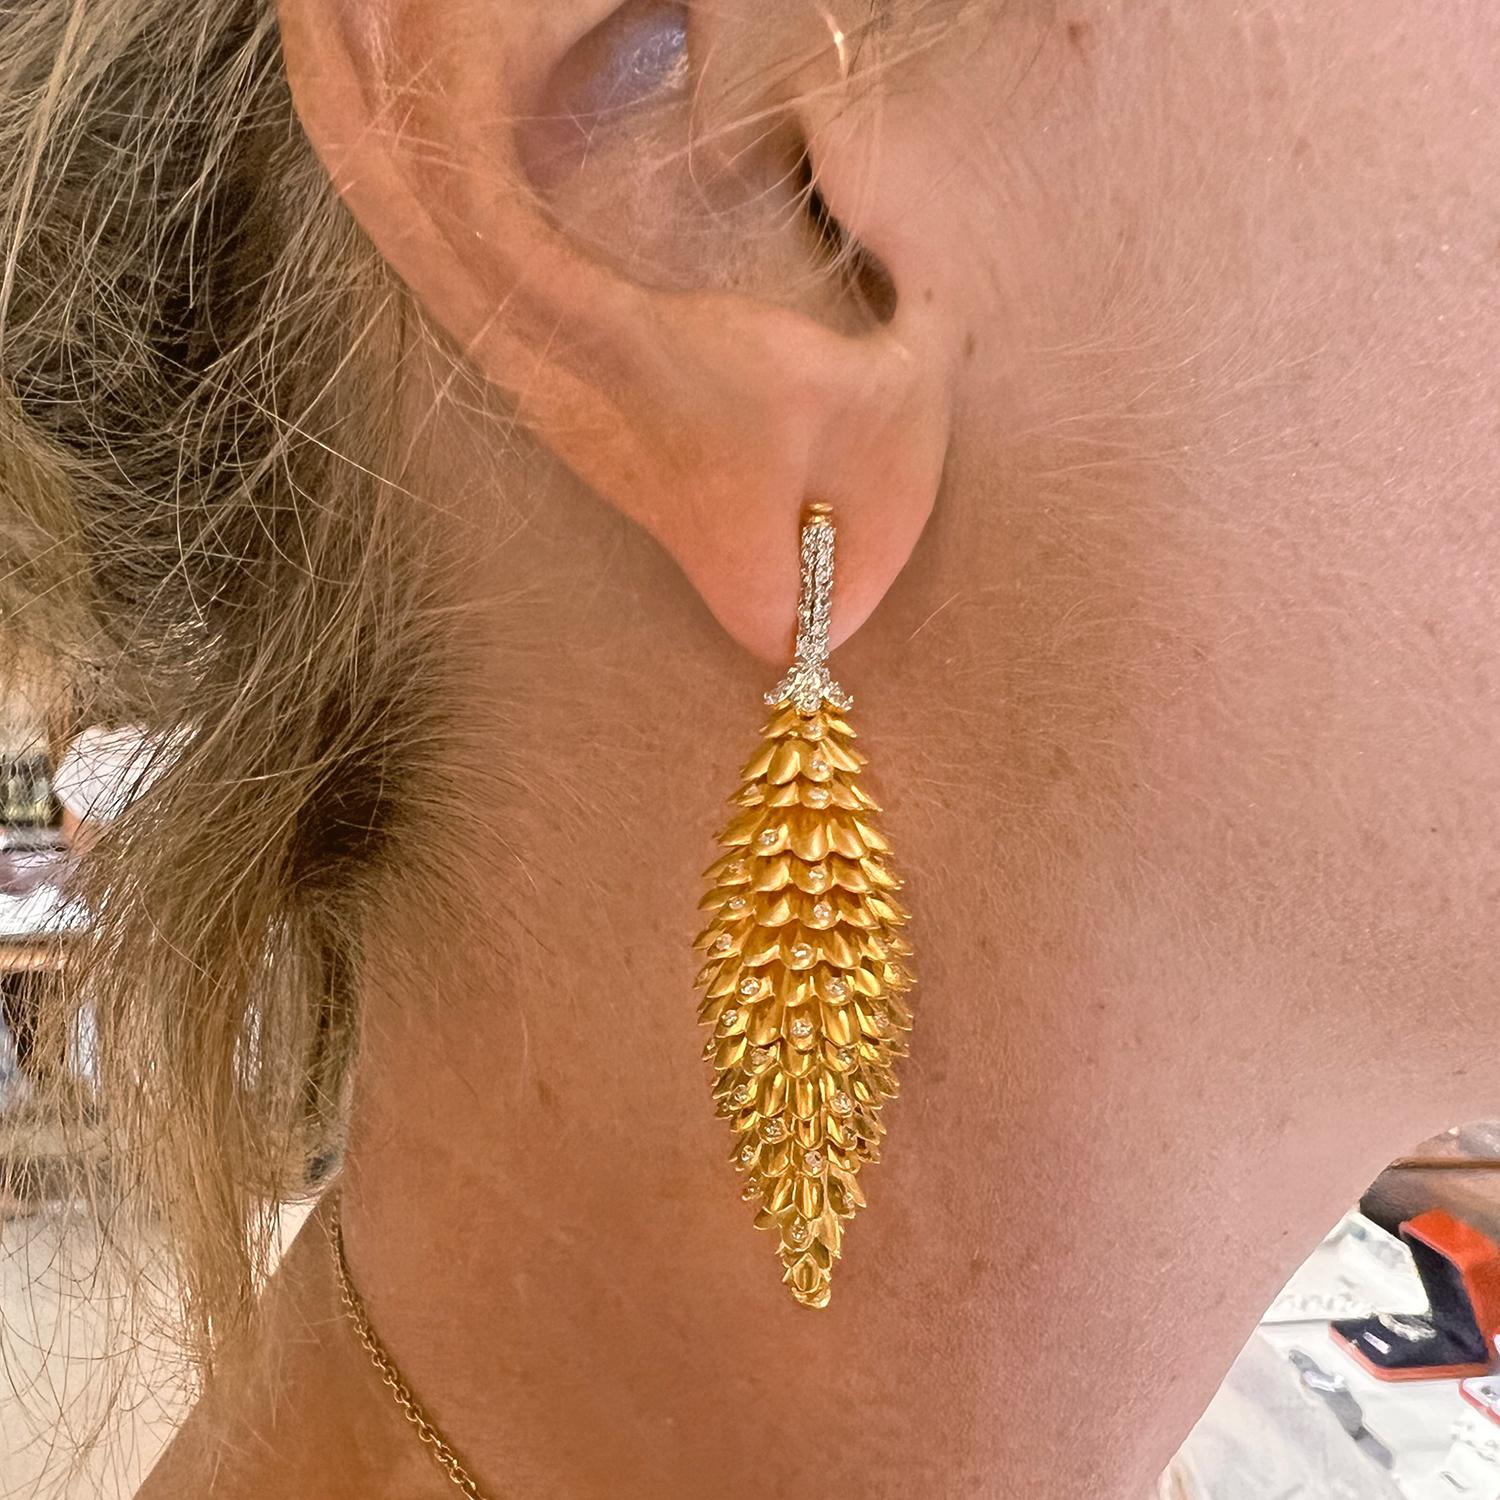 Pinecone-style articulated drop earrings, the scales of the cone designed in textured 18k yellow gold accented by small round-cut diamonds, with a pave-set diamond surmount in 18k white gold.  Diamonds weighing 1.60 total carats.  Posts with